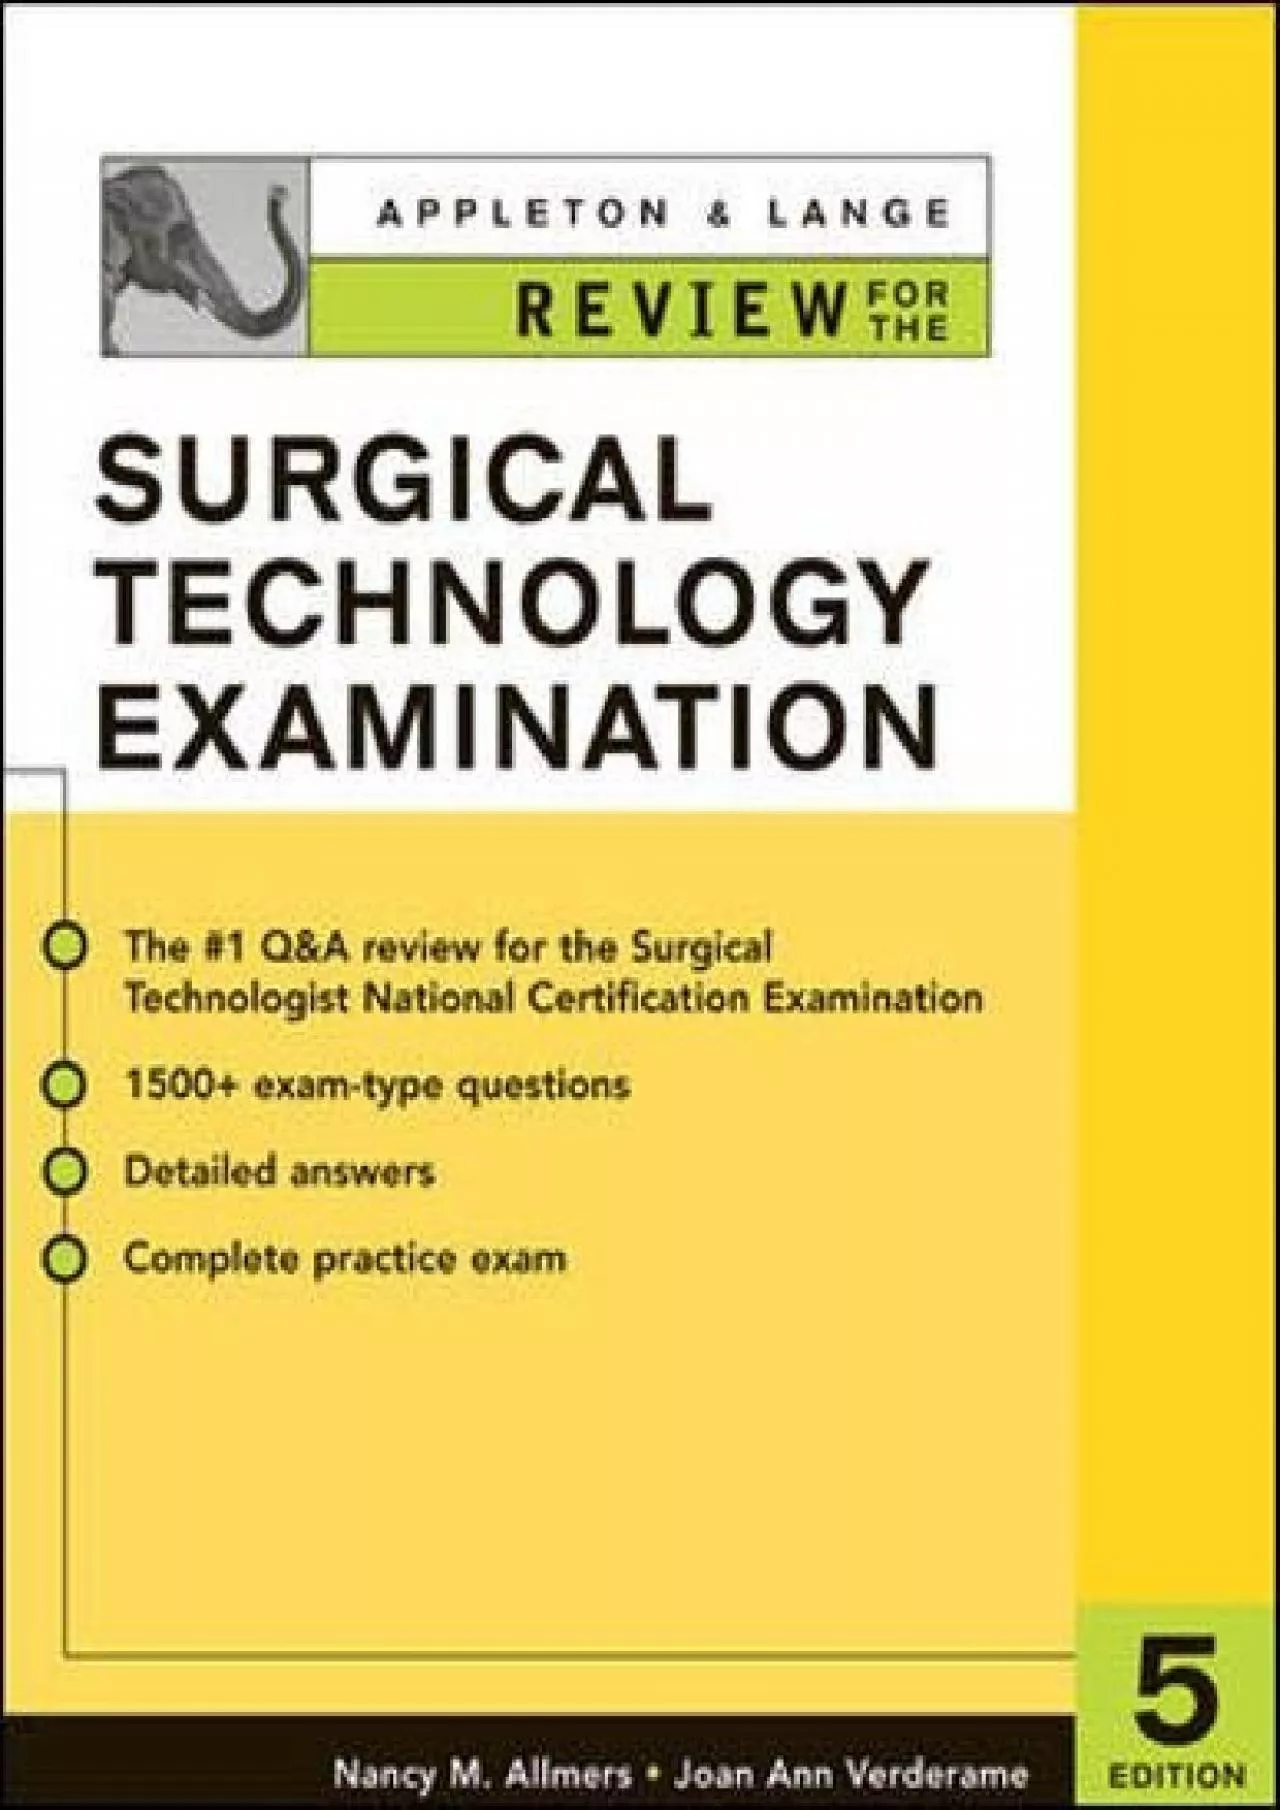 (BOOS)-Appleton & Lange Review for the Surgical Technology Examination